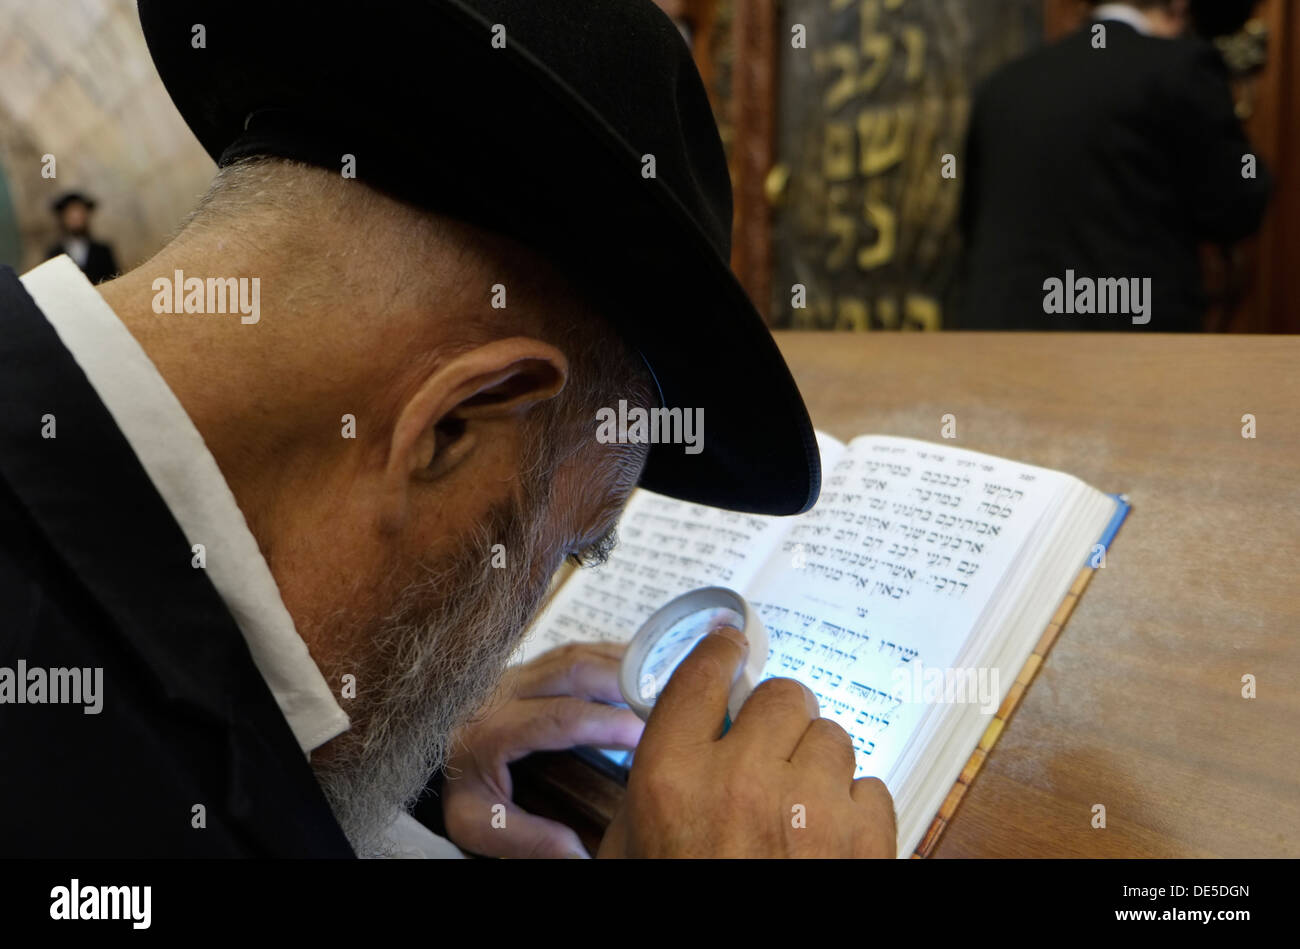 An Ultra Orthodox Jew reading the Sidur prayer book in the Synagogue of the Western Wall in East Jerusalem Israel Stock Photo